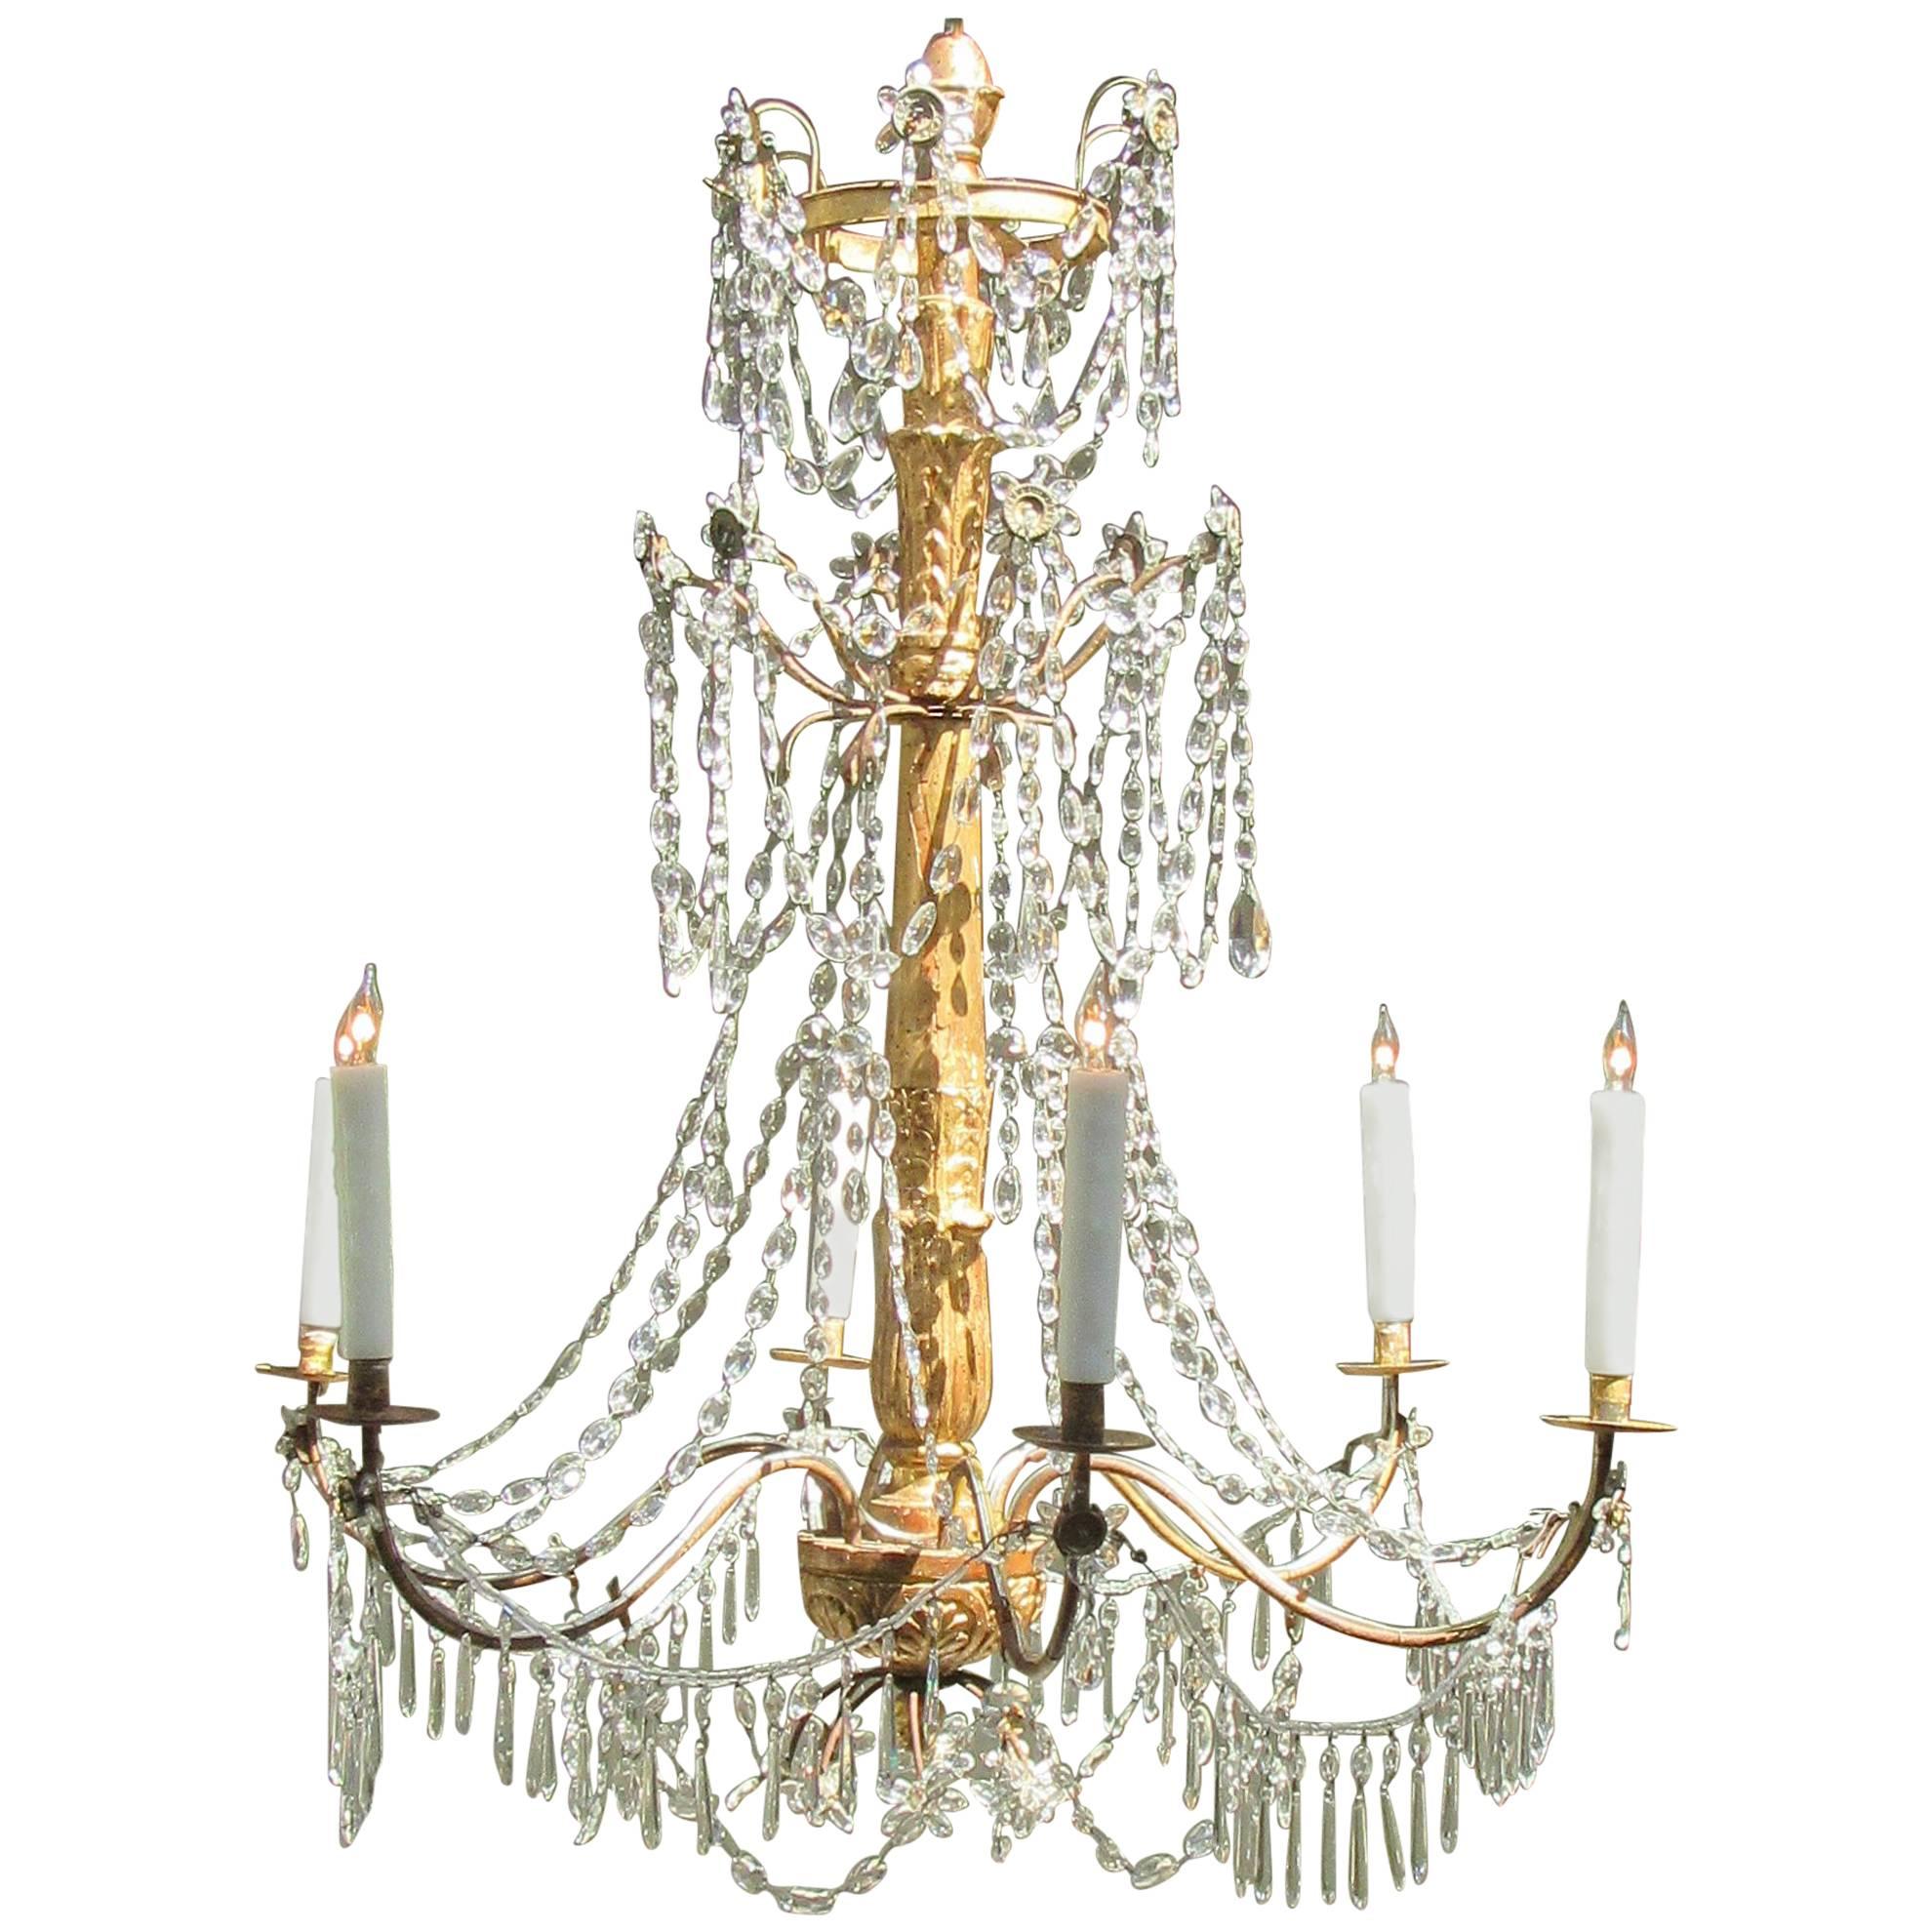 Late 18th Century Italian Genoese Giltwood, Tole and Crystal Chandelier